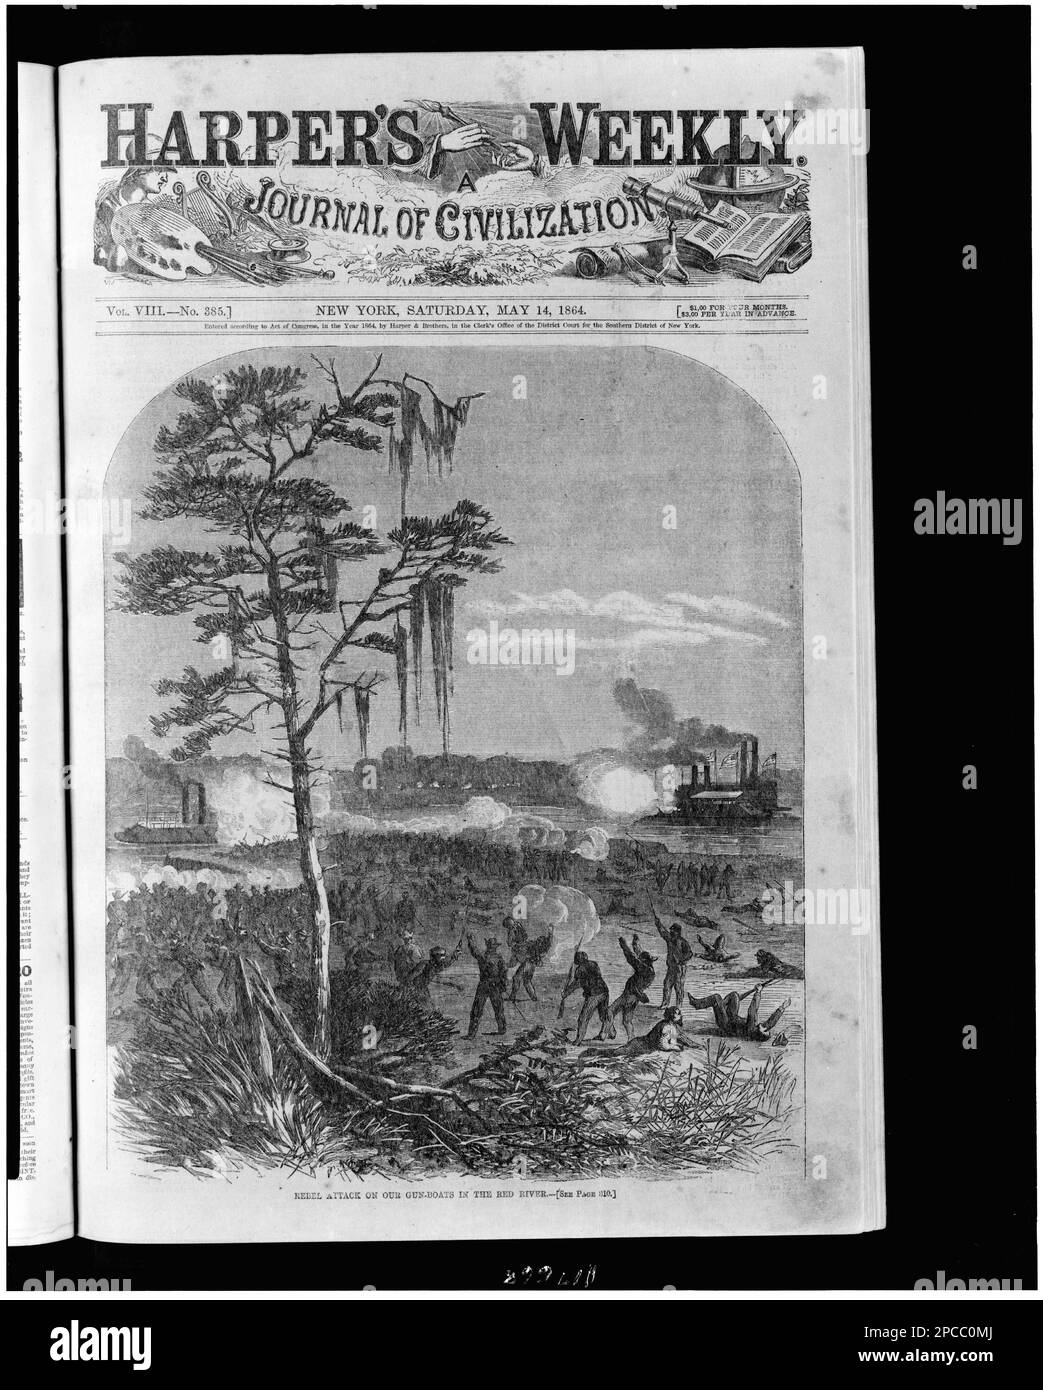 Rebel attack on our gun-boats in the Red River. Illus. in: Harper's weekly, v. 8, 1864 May 14, p. 305. Naval warfare, Red River (Tex.-La.), 1860-1870, United States, History, Civil War, 1861-1865, Campaigns & battles. Stock Photo